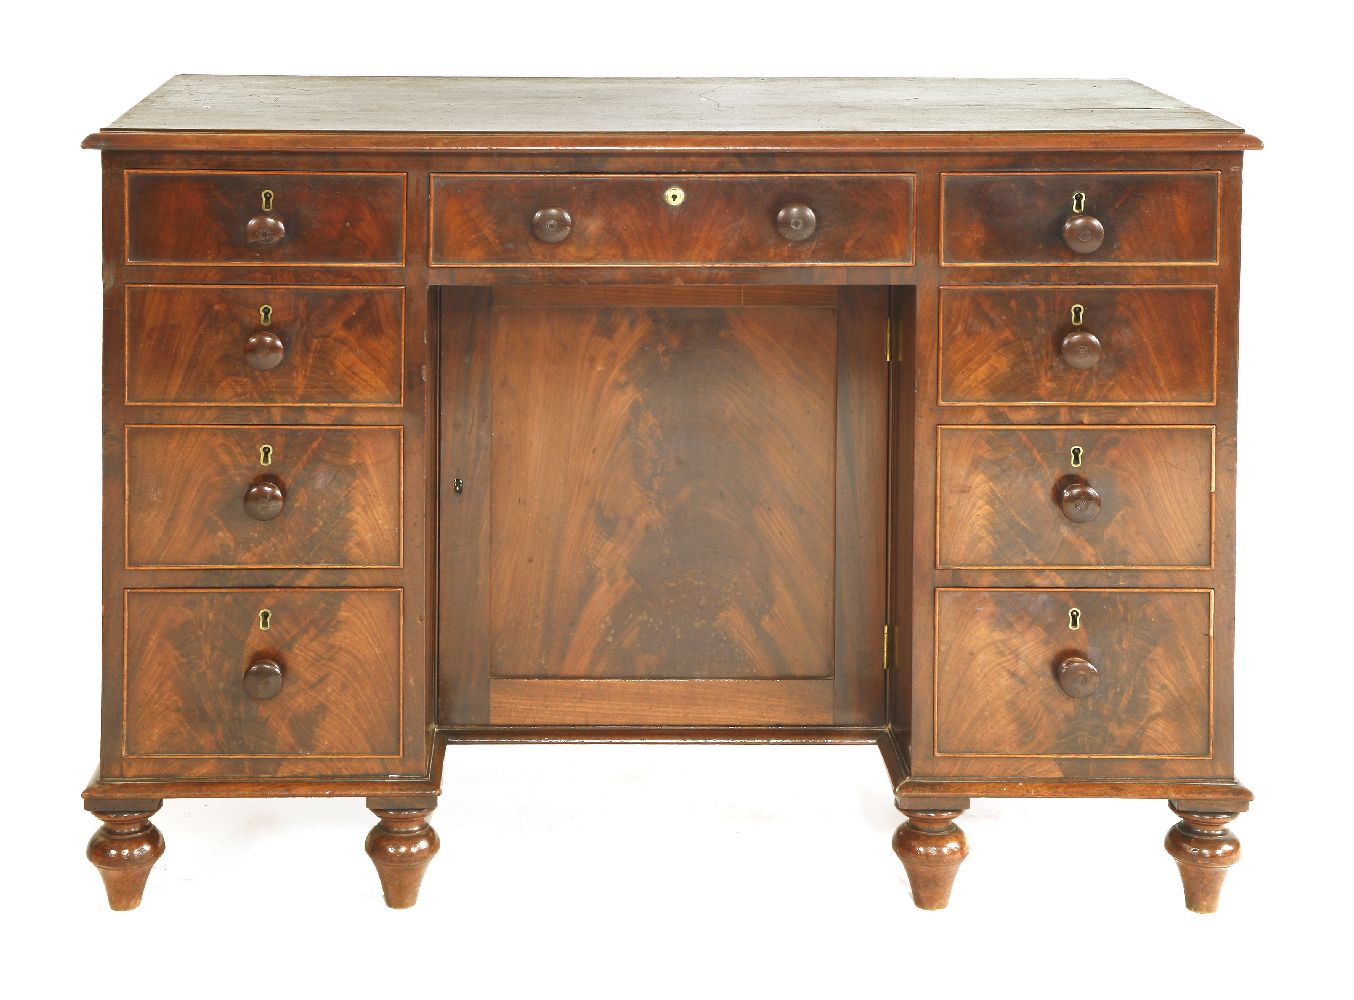 A William IV mahogany desk,with nine various drawers arranged around a central kneehole and